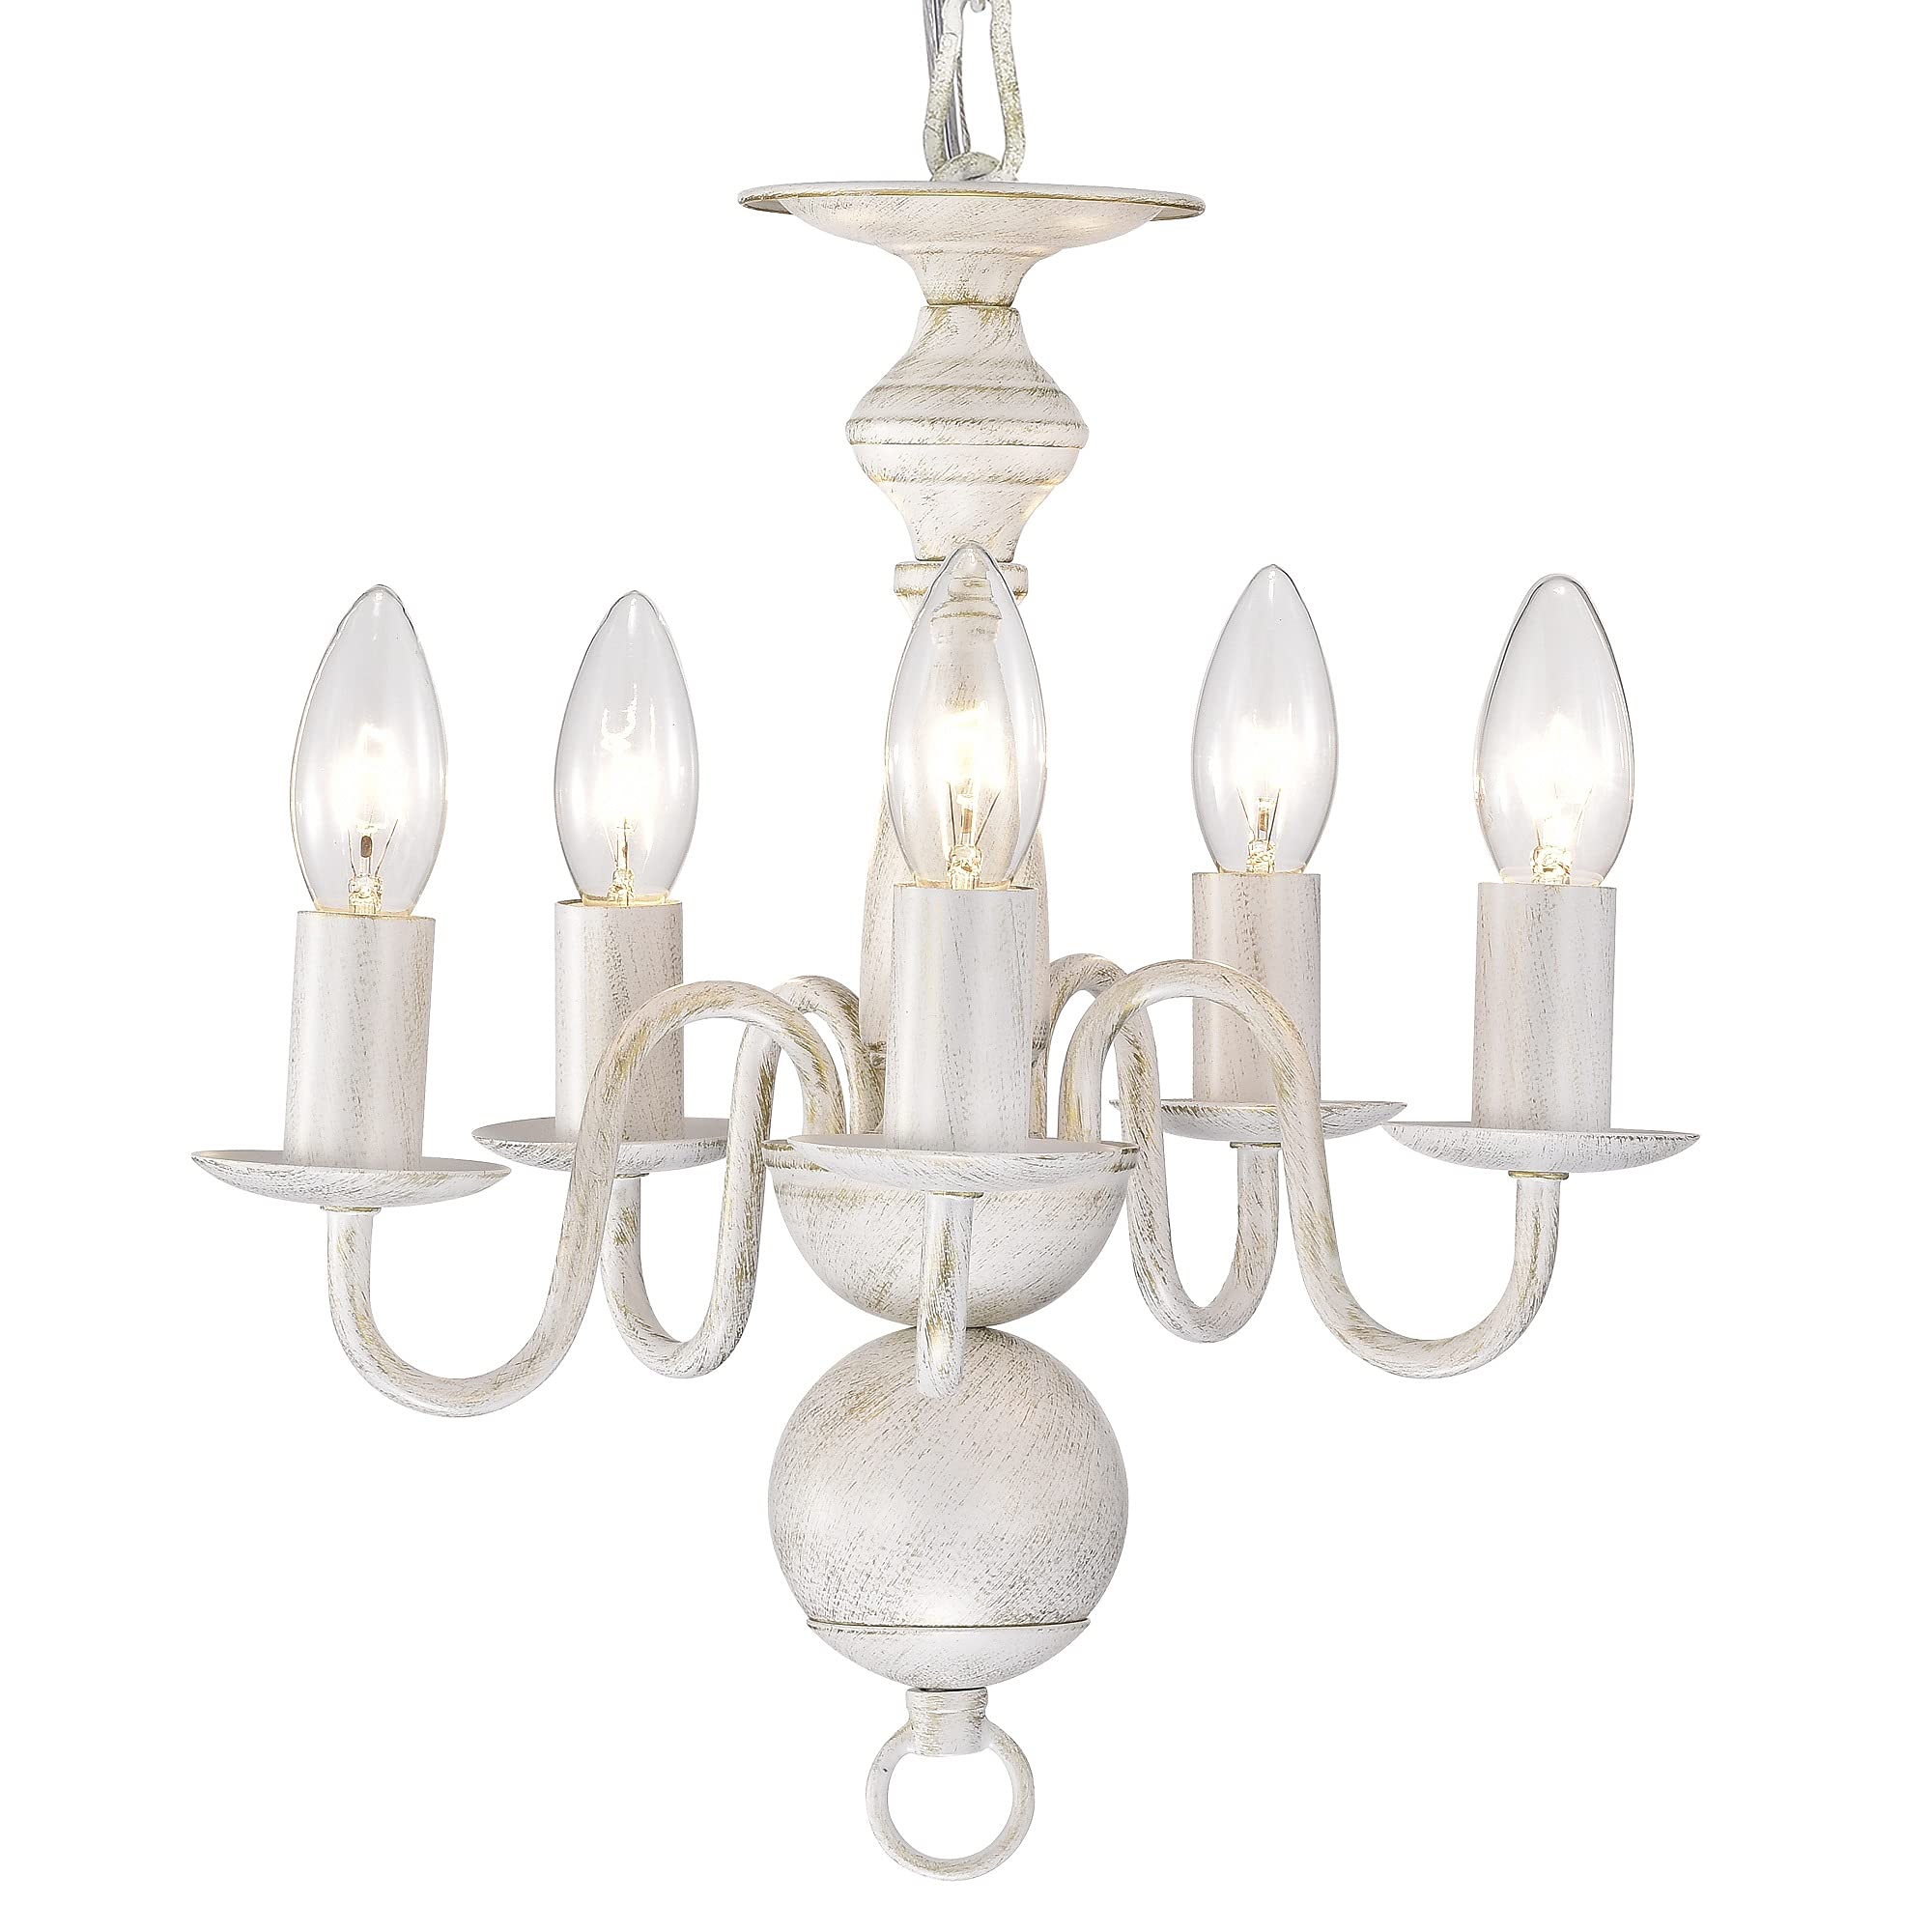 ALighting White chandelier Small Rustic chandeliers Farmhouse Metal chandeliers 5 Light French country chandelier Lighting for Entryway,Fo